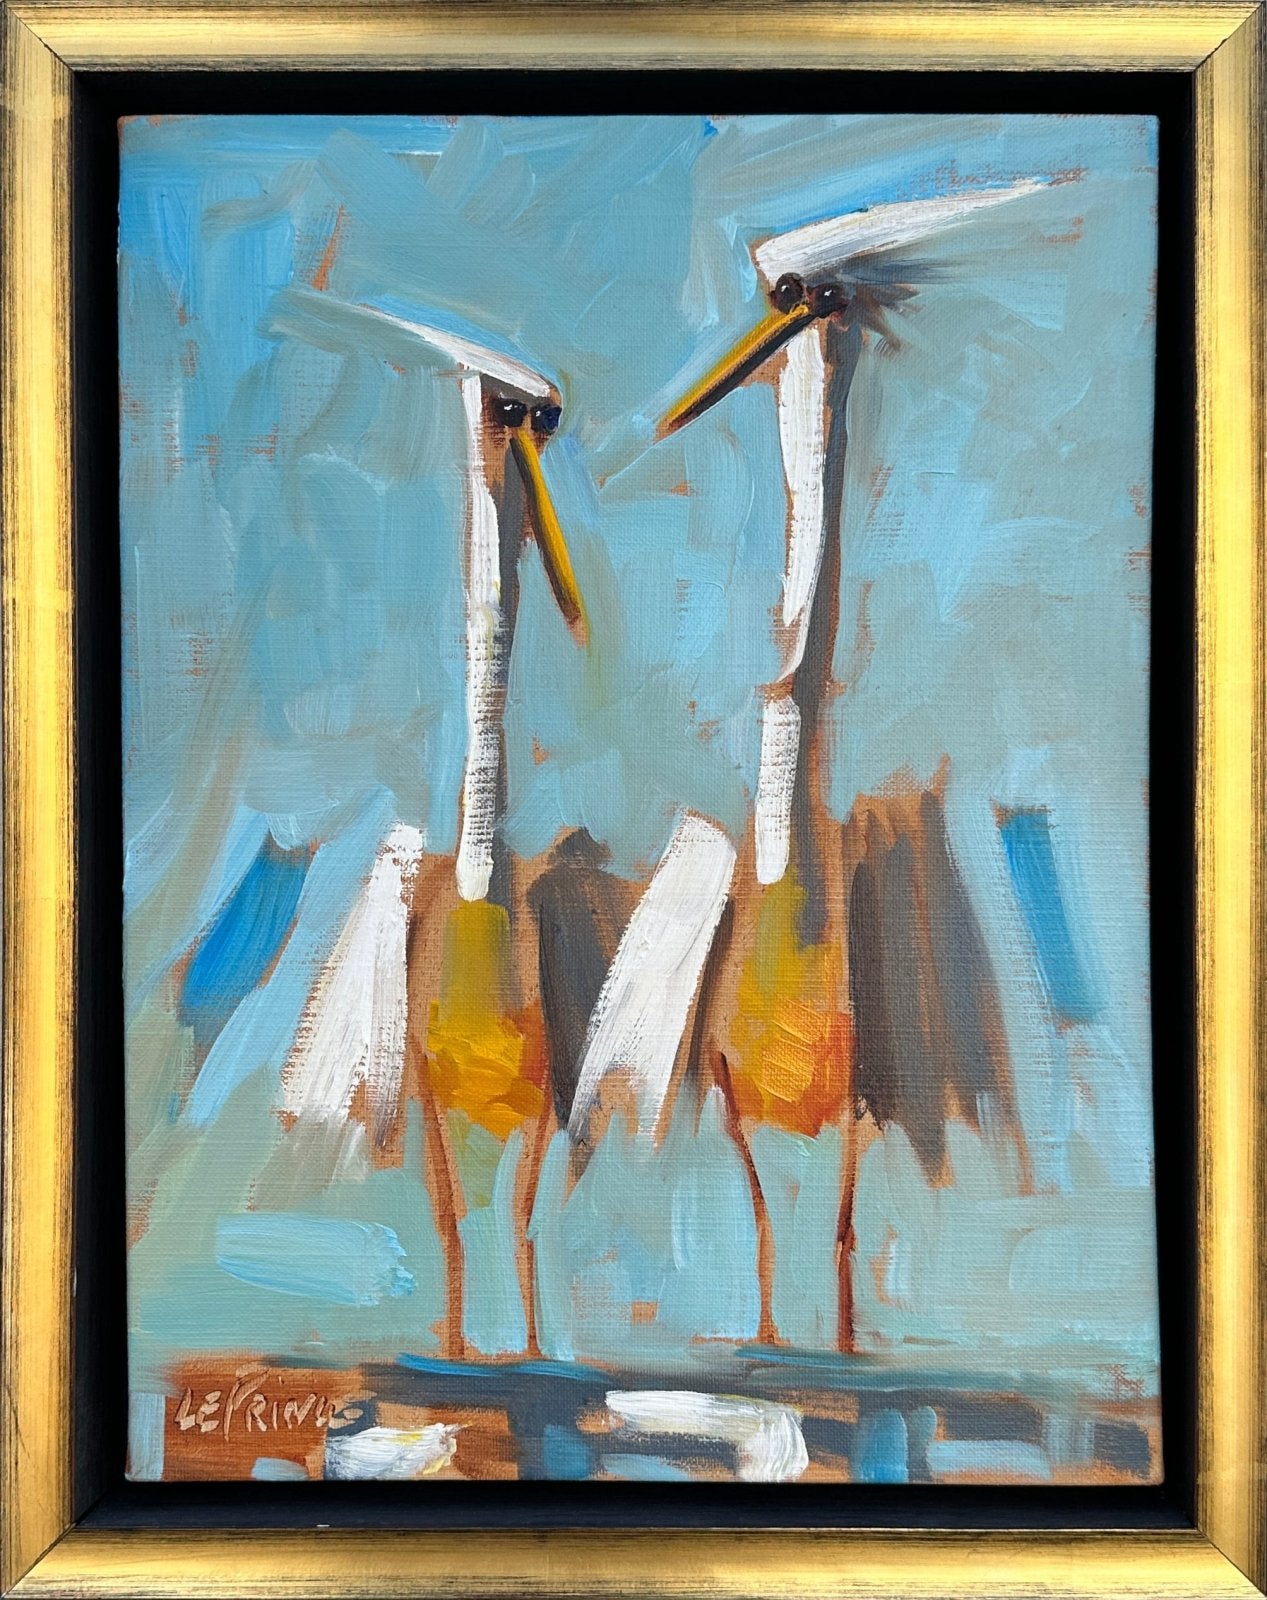 Tweetmates by Kevin LePrince at LePrince Galleries